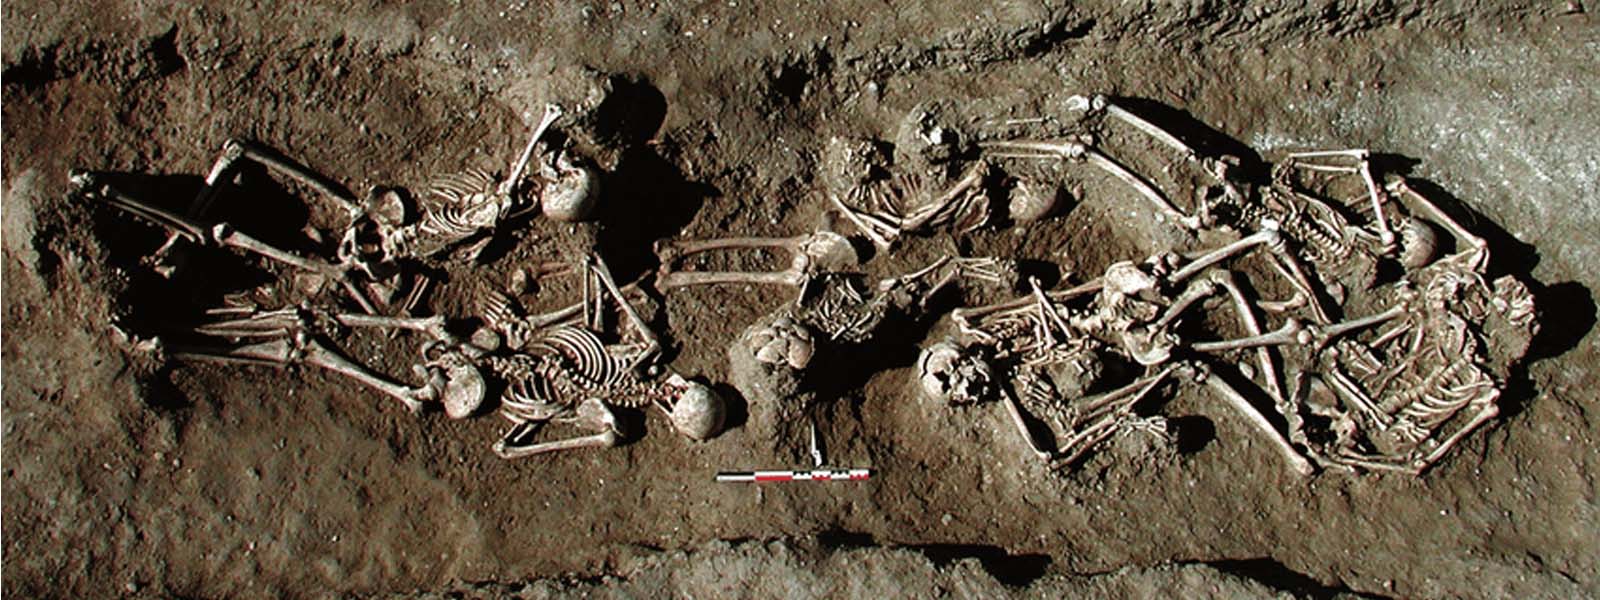 207 skeletal remains unearthed in Manna excavation